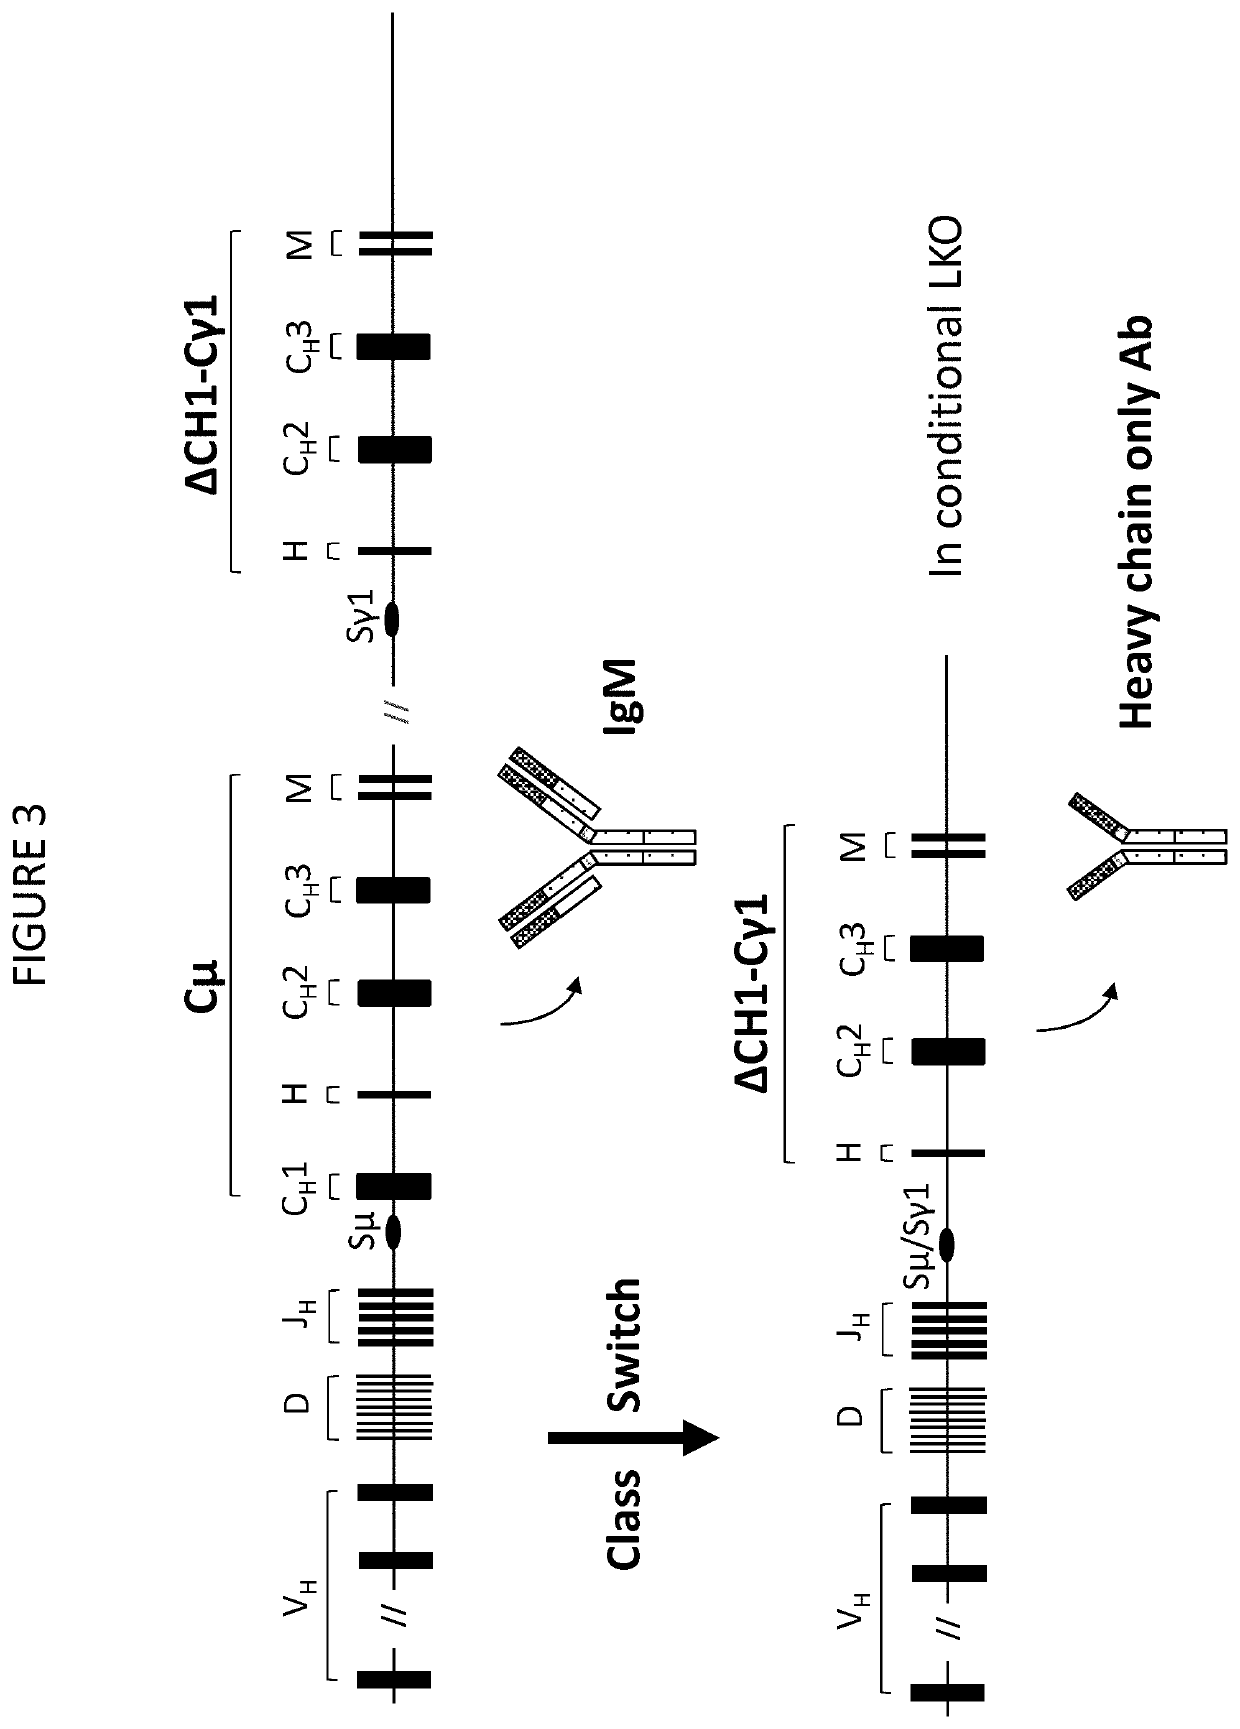 Transgenic non-human vertebrate for the in vivo production of dual specificity immunoglobulins or hypermutated heavy chain only immunoglobulins